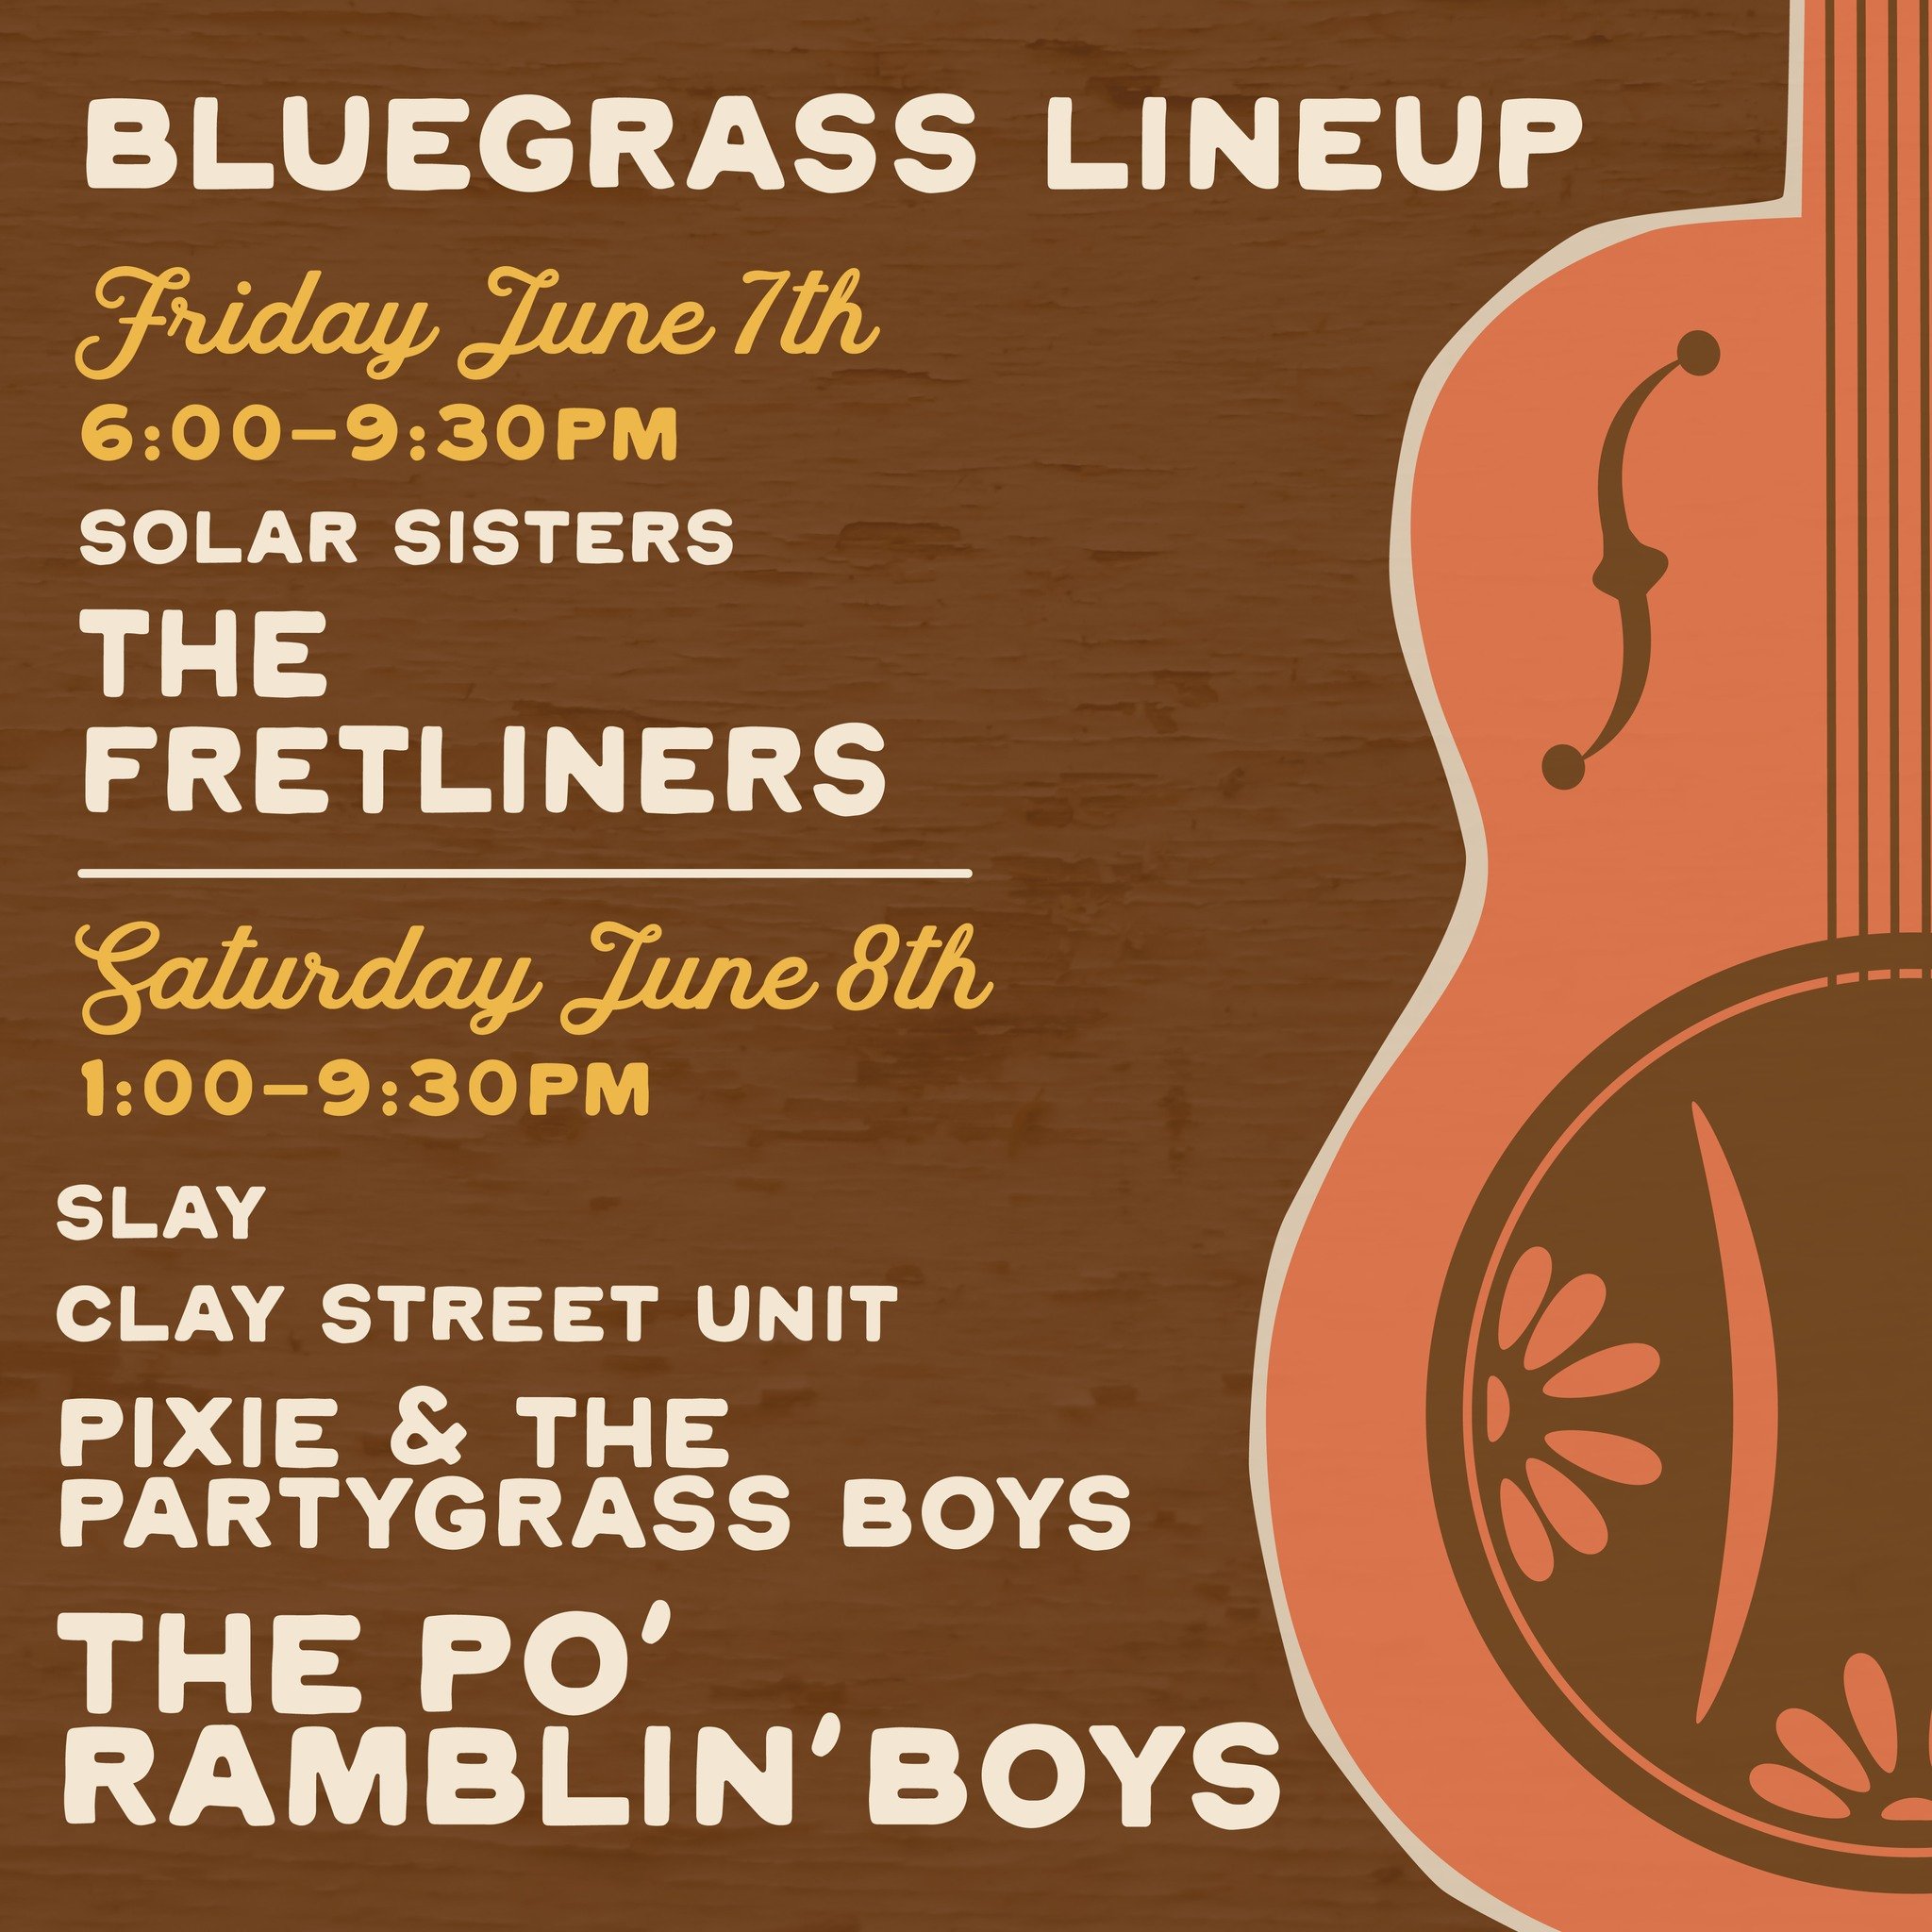 Free concert alert!! 🎶 We have some incredible bands lined up to play at our Bluegrass and Brews Festival this year! Be sure you make it Downtown Loveland on June 7th &amp; 8th for some great music and delicious, local beers!! #bluegrass

FRIDAY, JU